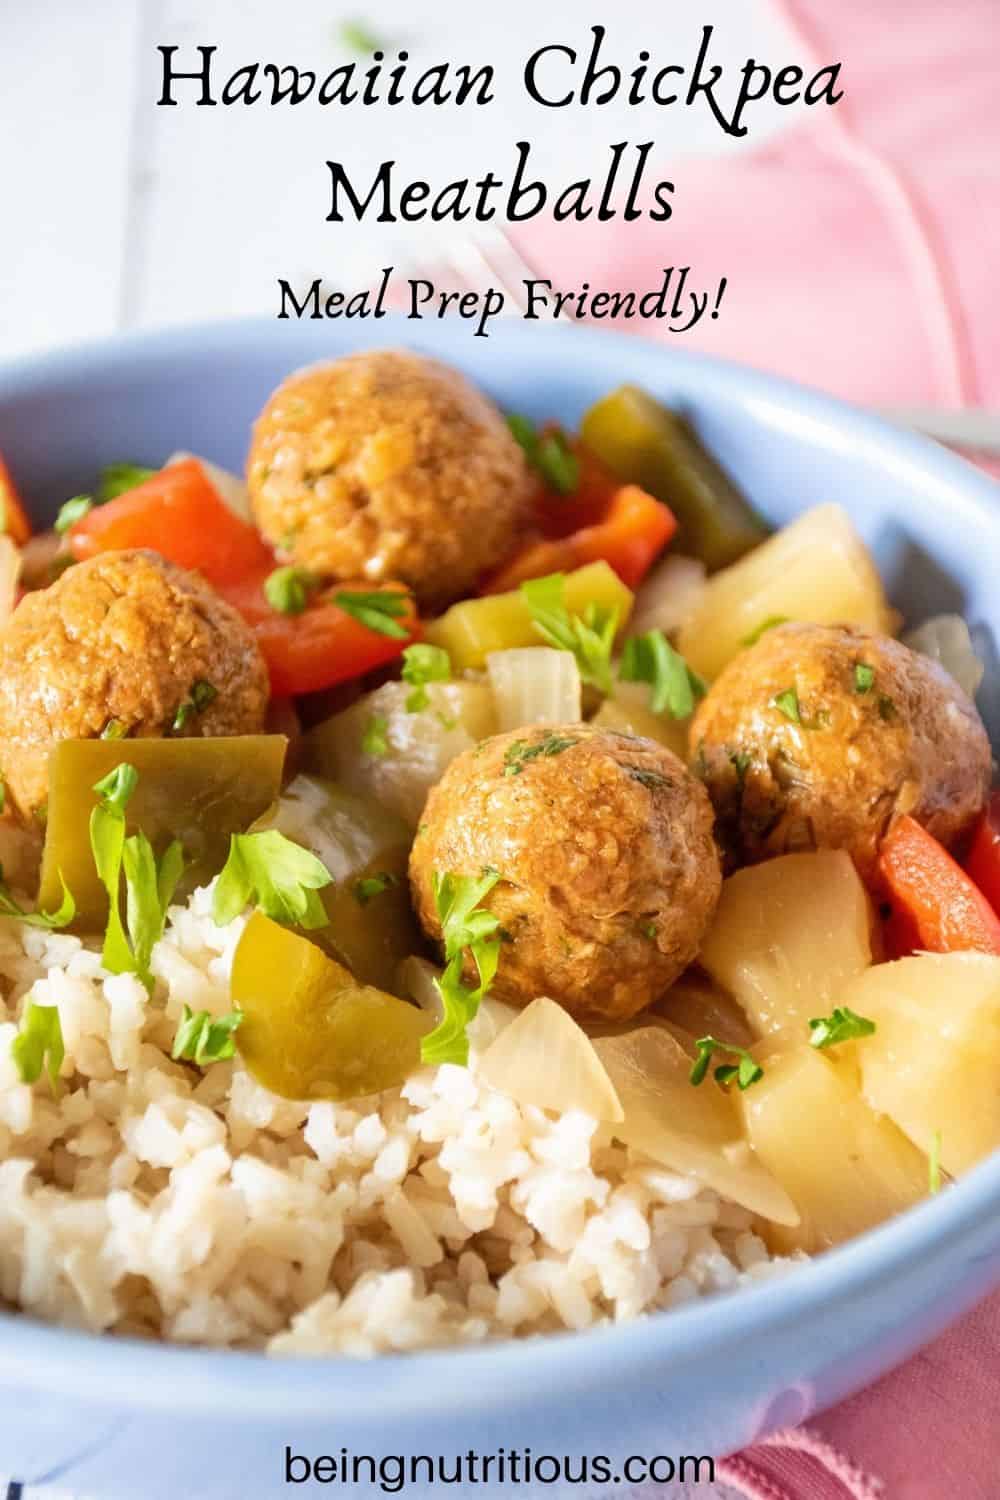 Bowl with rice, meatballs, and onions and bell peppers. Text overlay: Hawaiian Meatballs; Meal prep friendly!